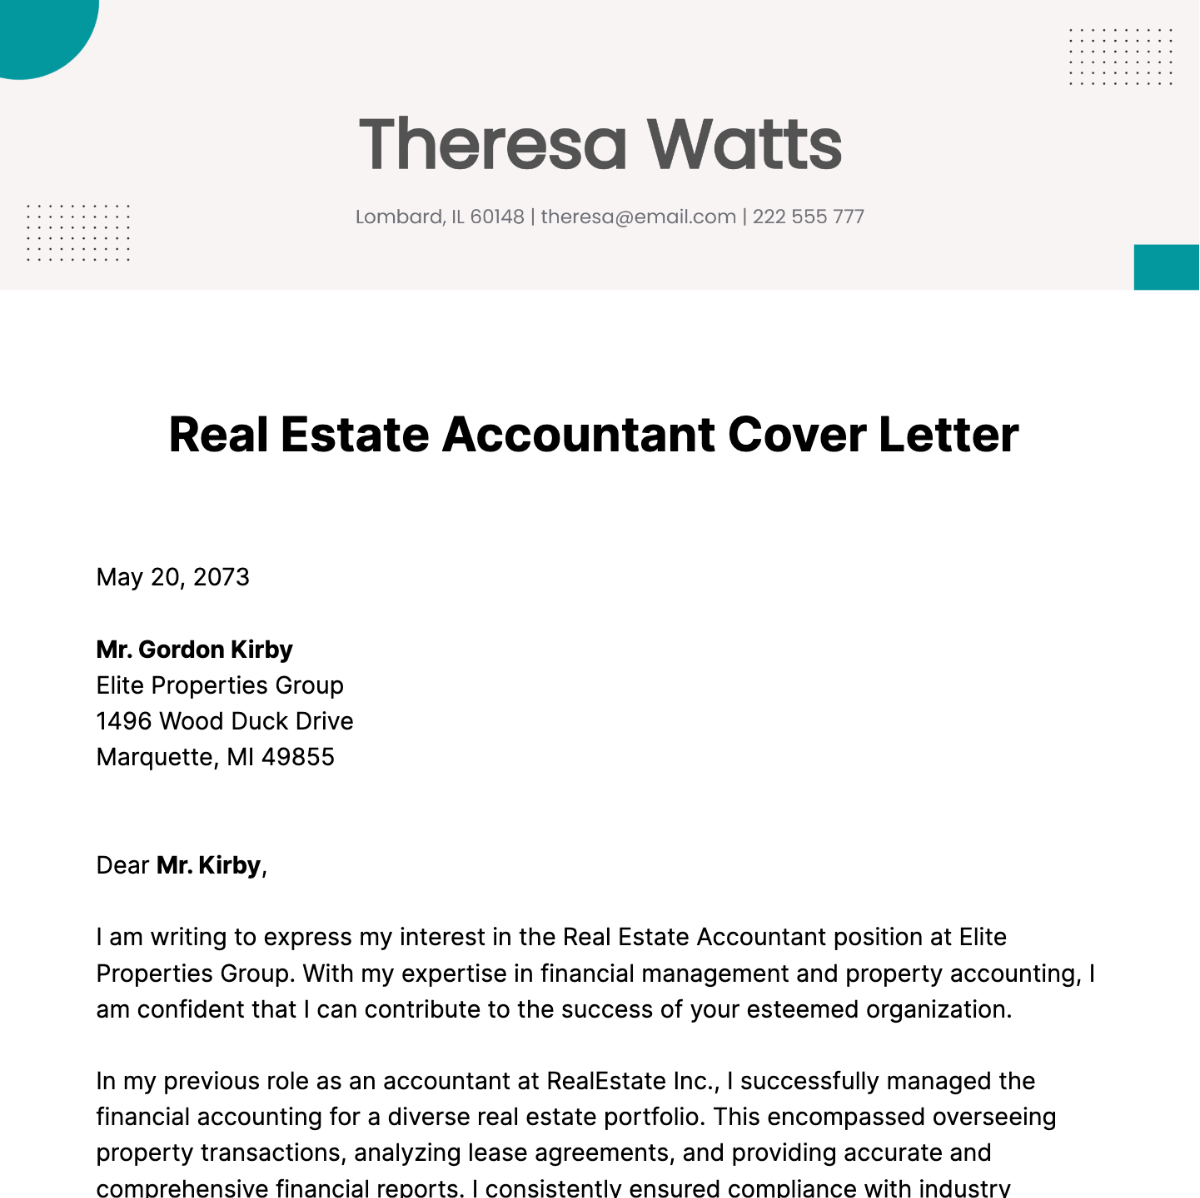 Real Estate Accountant Cover Letter Template